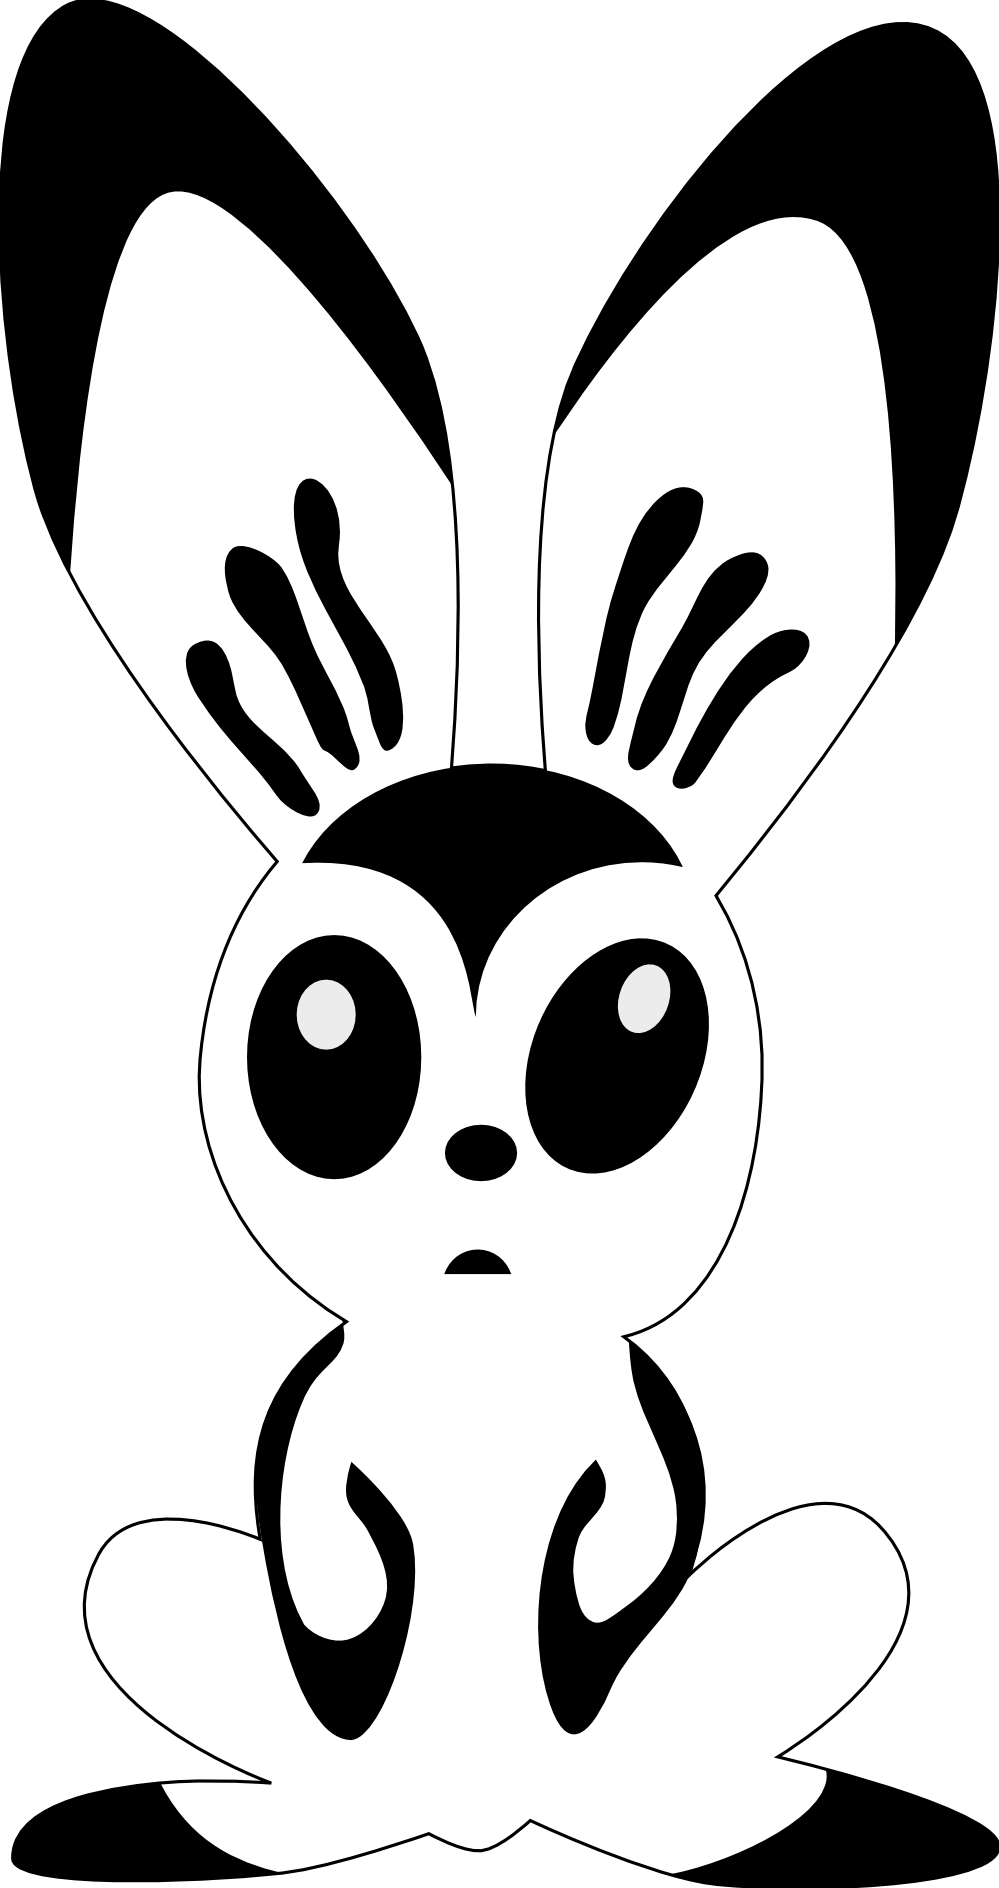 free black and white bunny clipart - photo #10